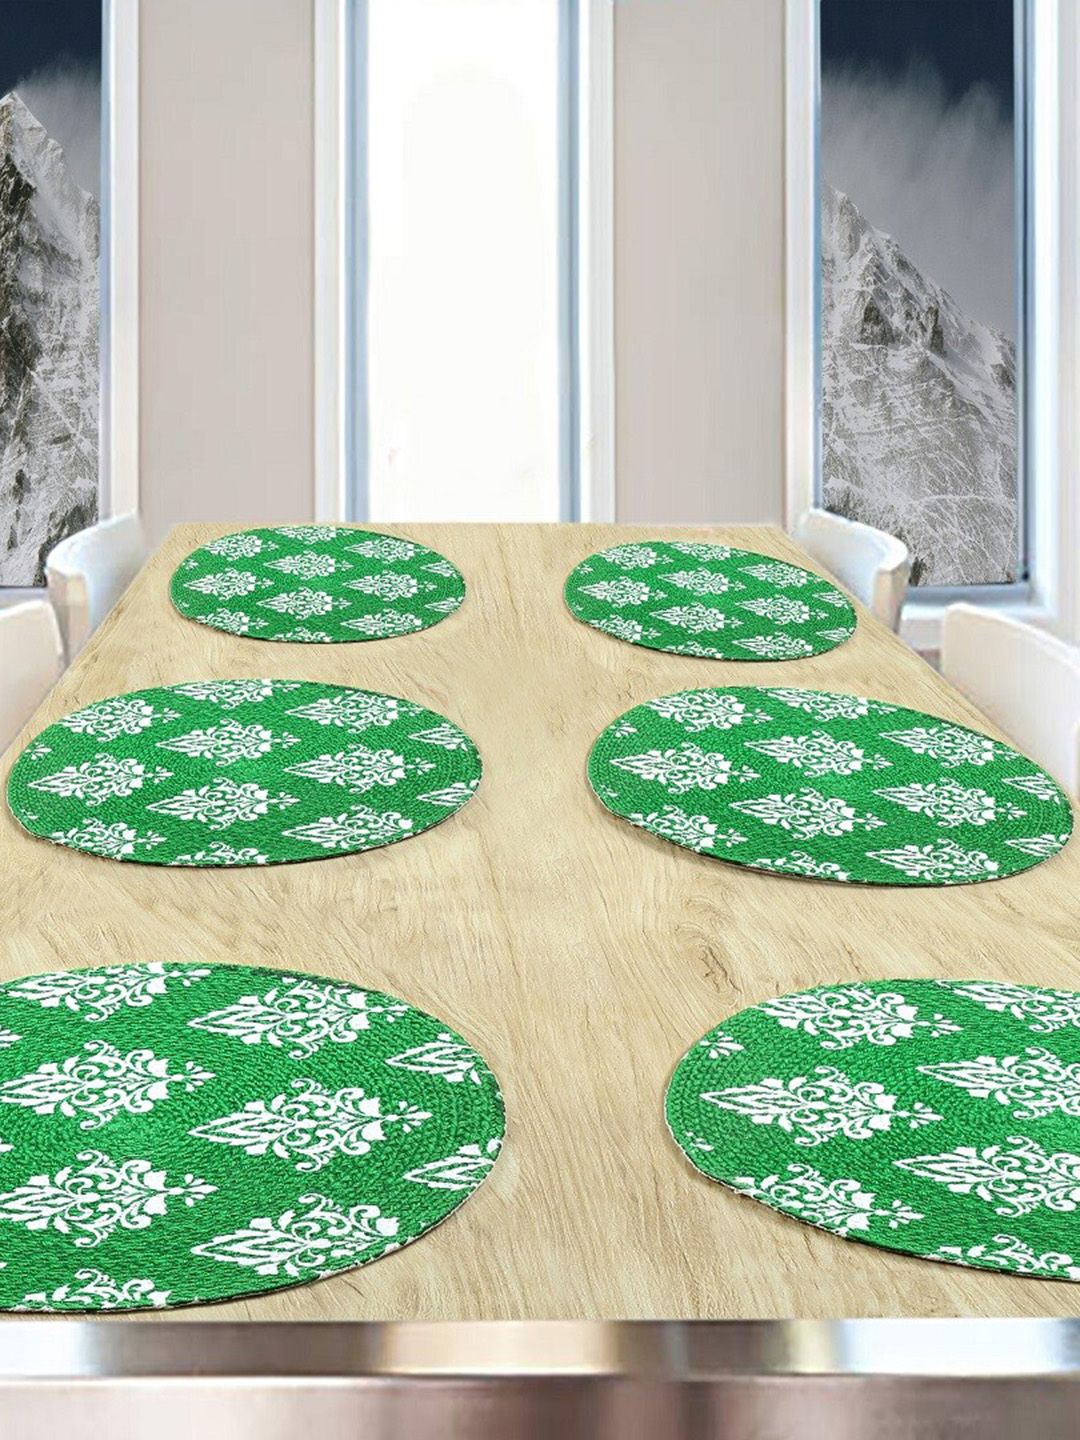 BELLA TRUE Set Of 6 Green & White Ethnic Motifs Printed Pure Cotton Round Table Placemats Price in India